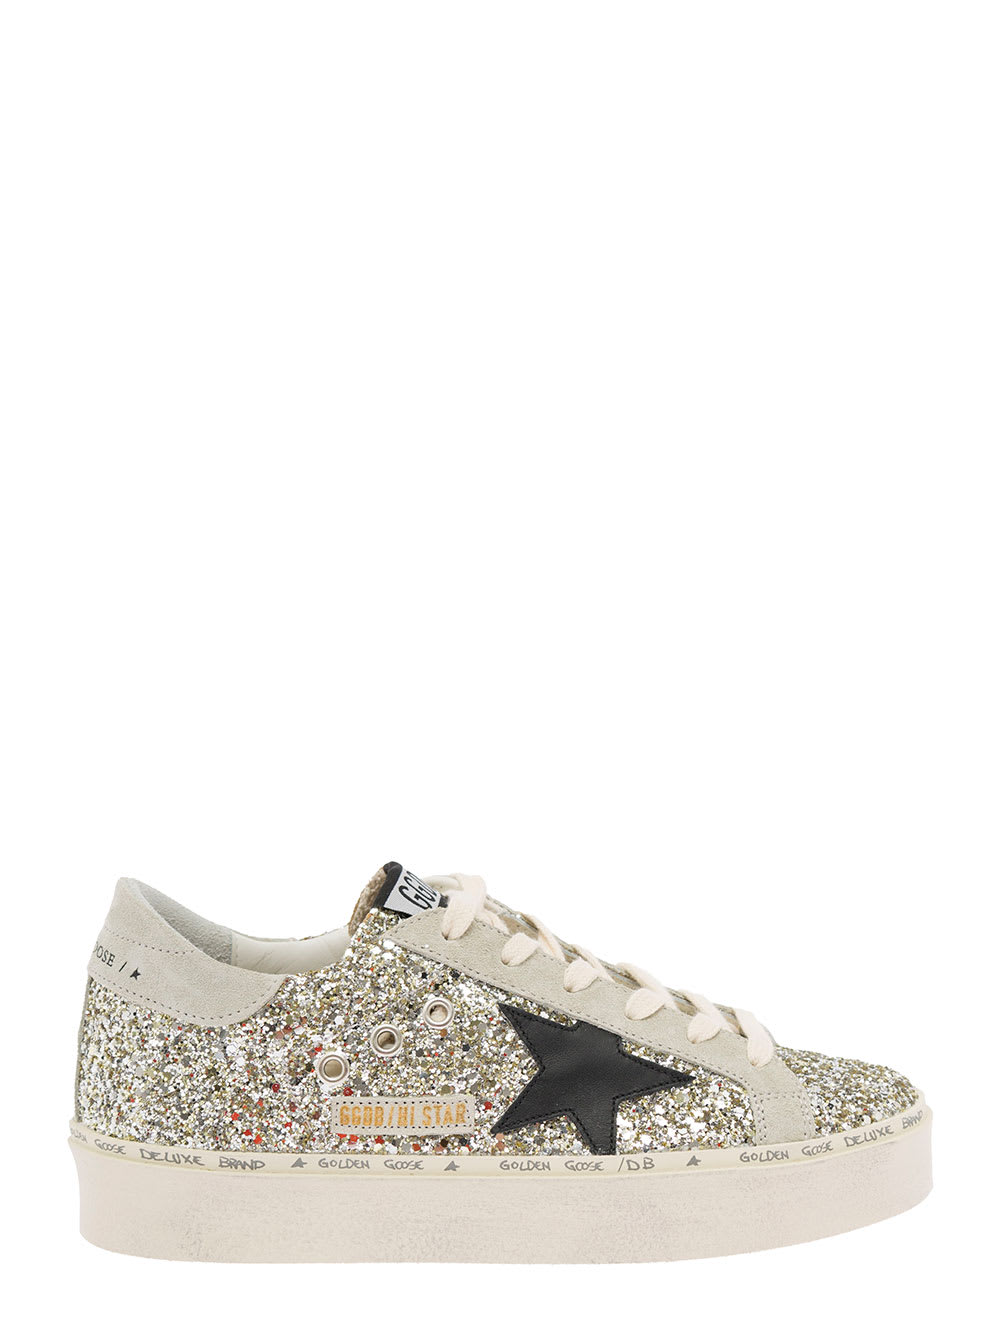 Golden Goose Womans Hi Star Glittered Leather Sneakers